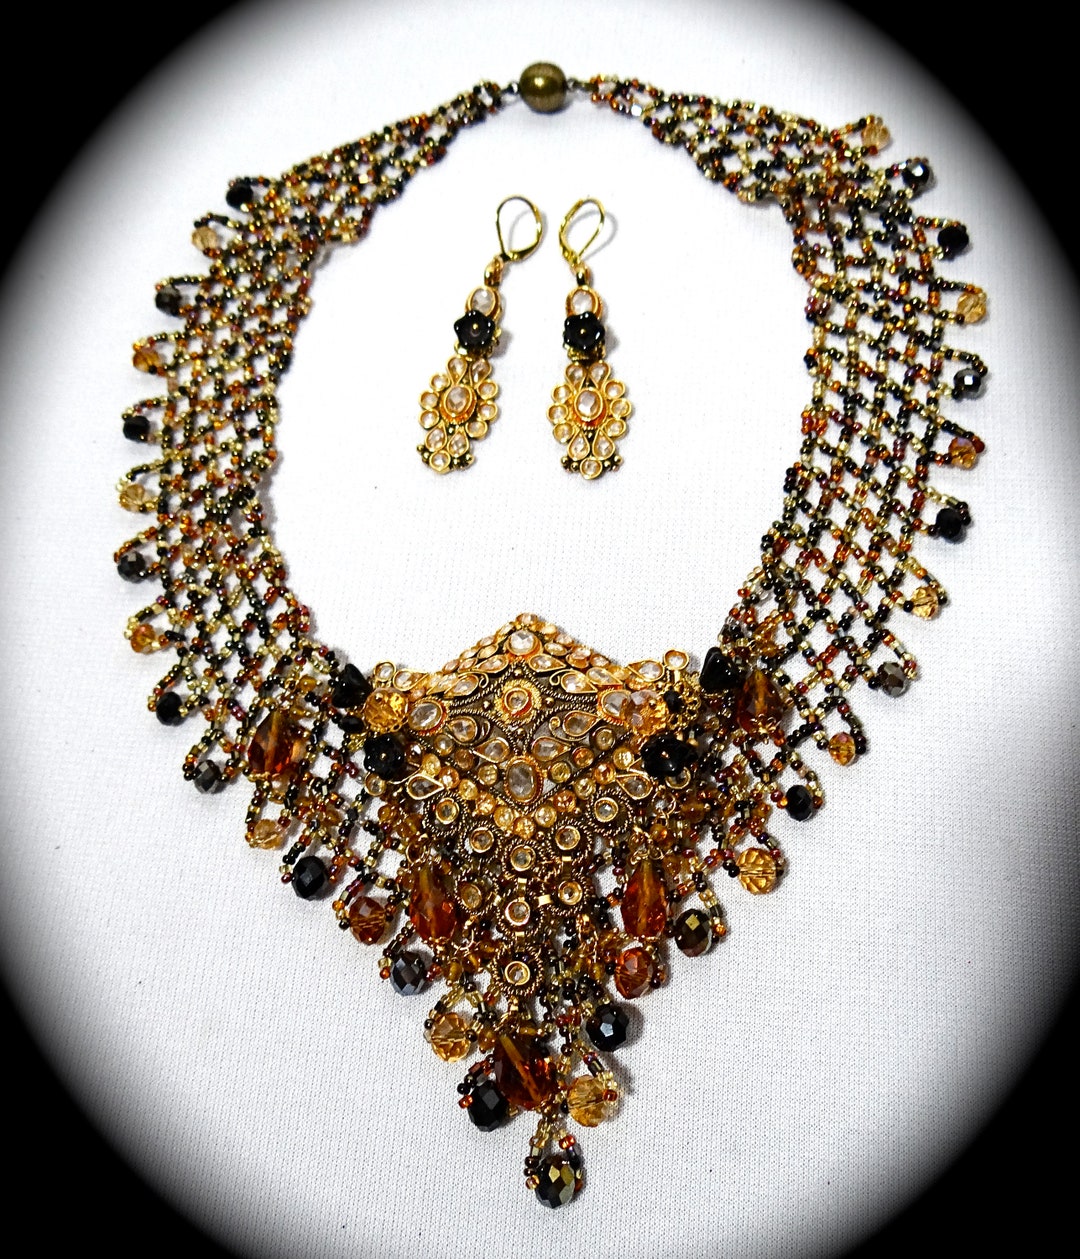 Beaded Bib Necklace Set Autumn Collar Assemblage Jewelry N-113 - Etsy